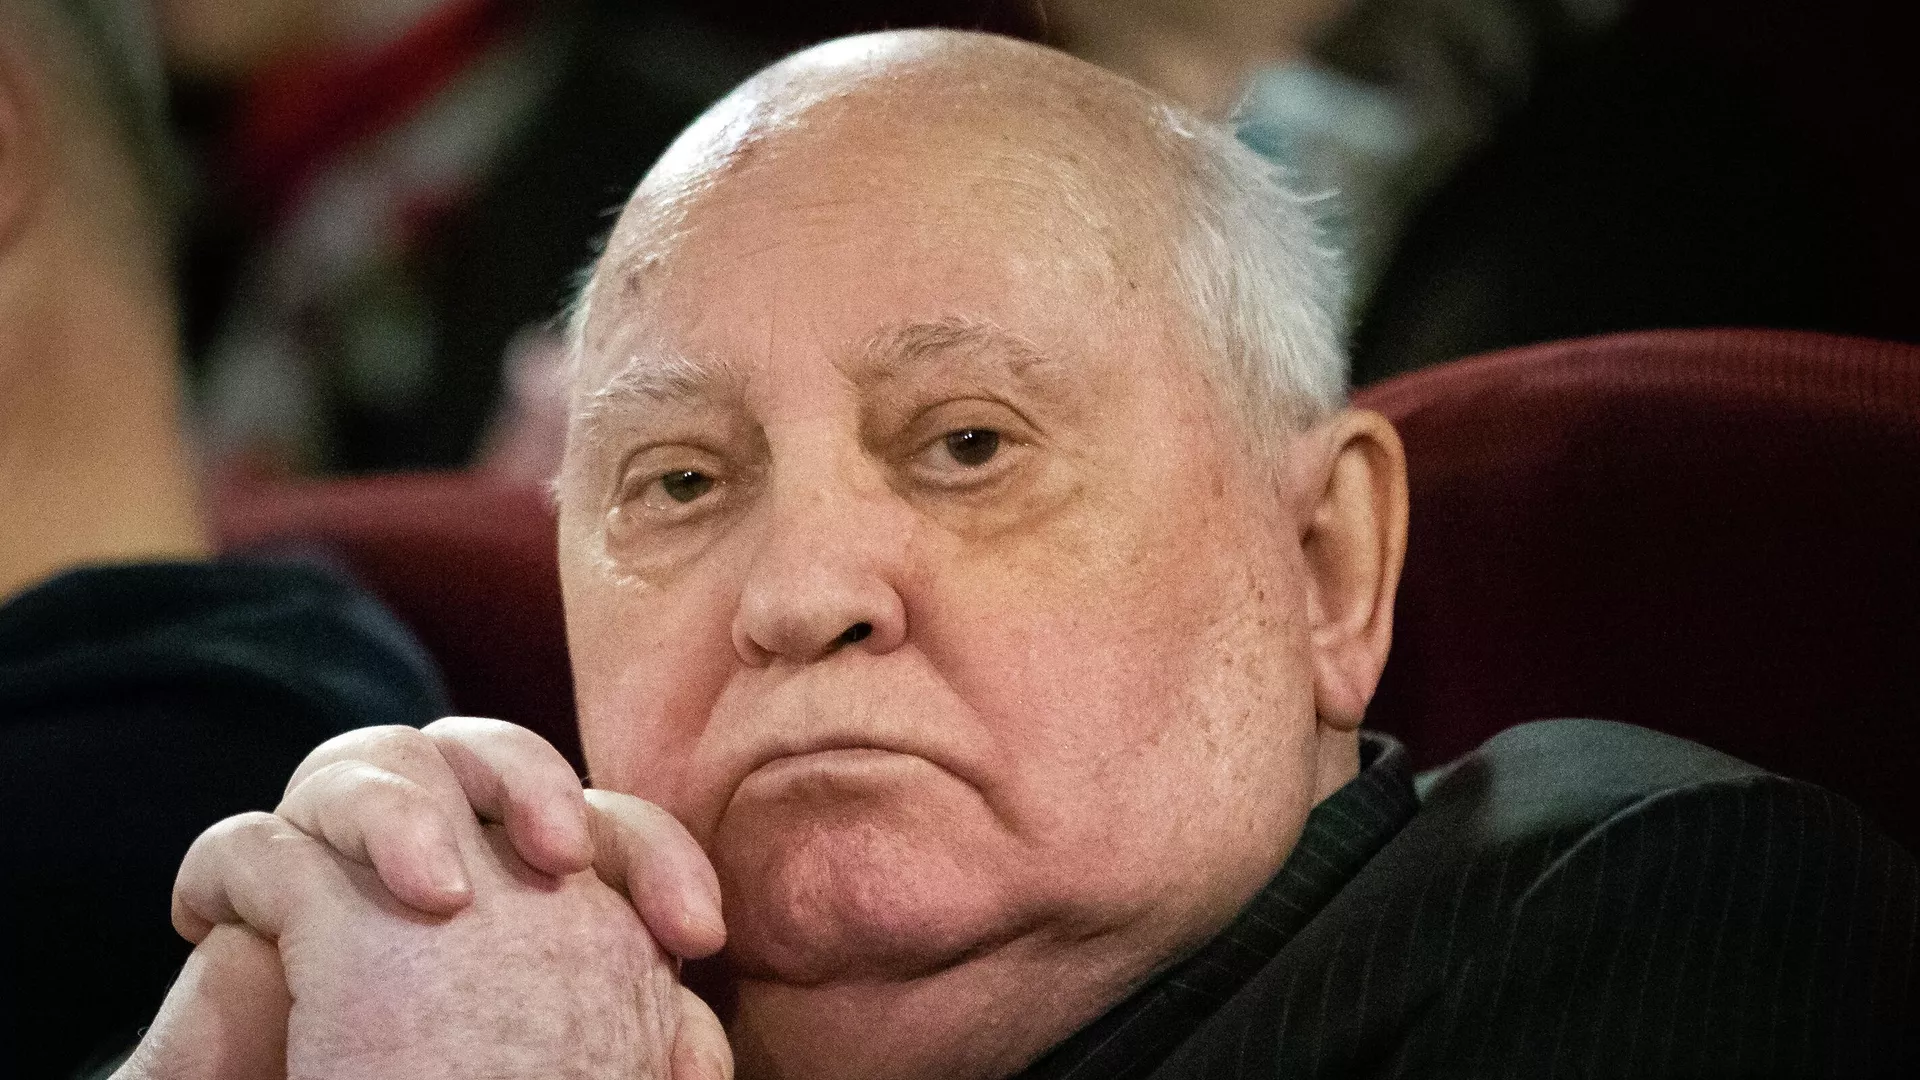 Mikhail Gorbachev Dead at 91 After Being Diagnosed With Serious Illness - Central Clinical Hospital